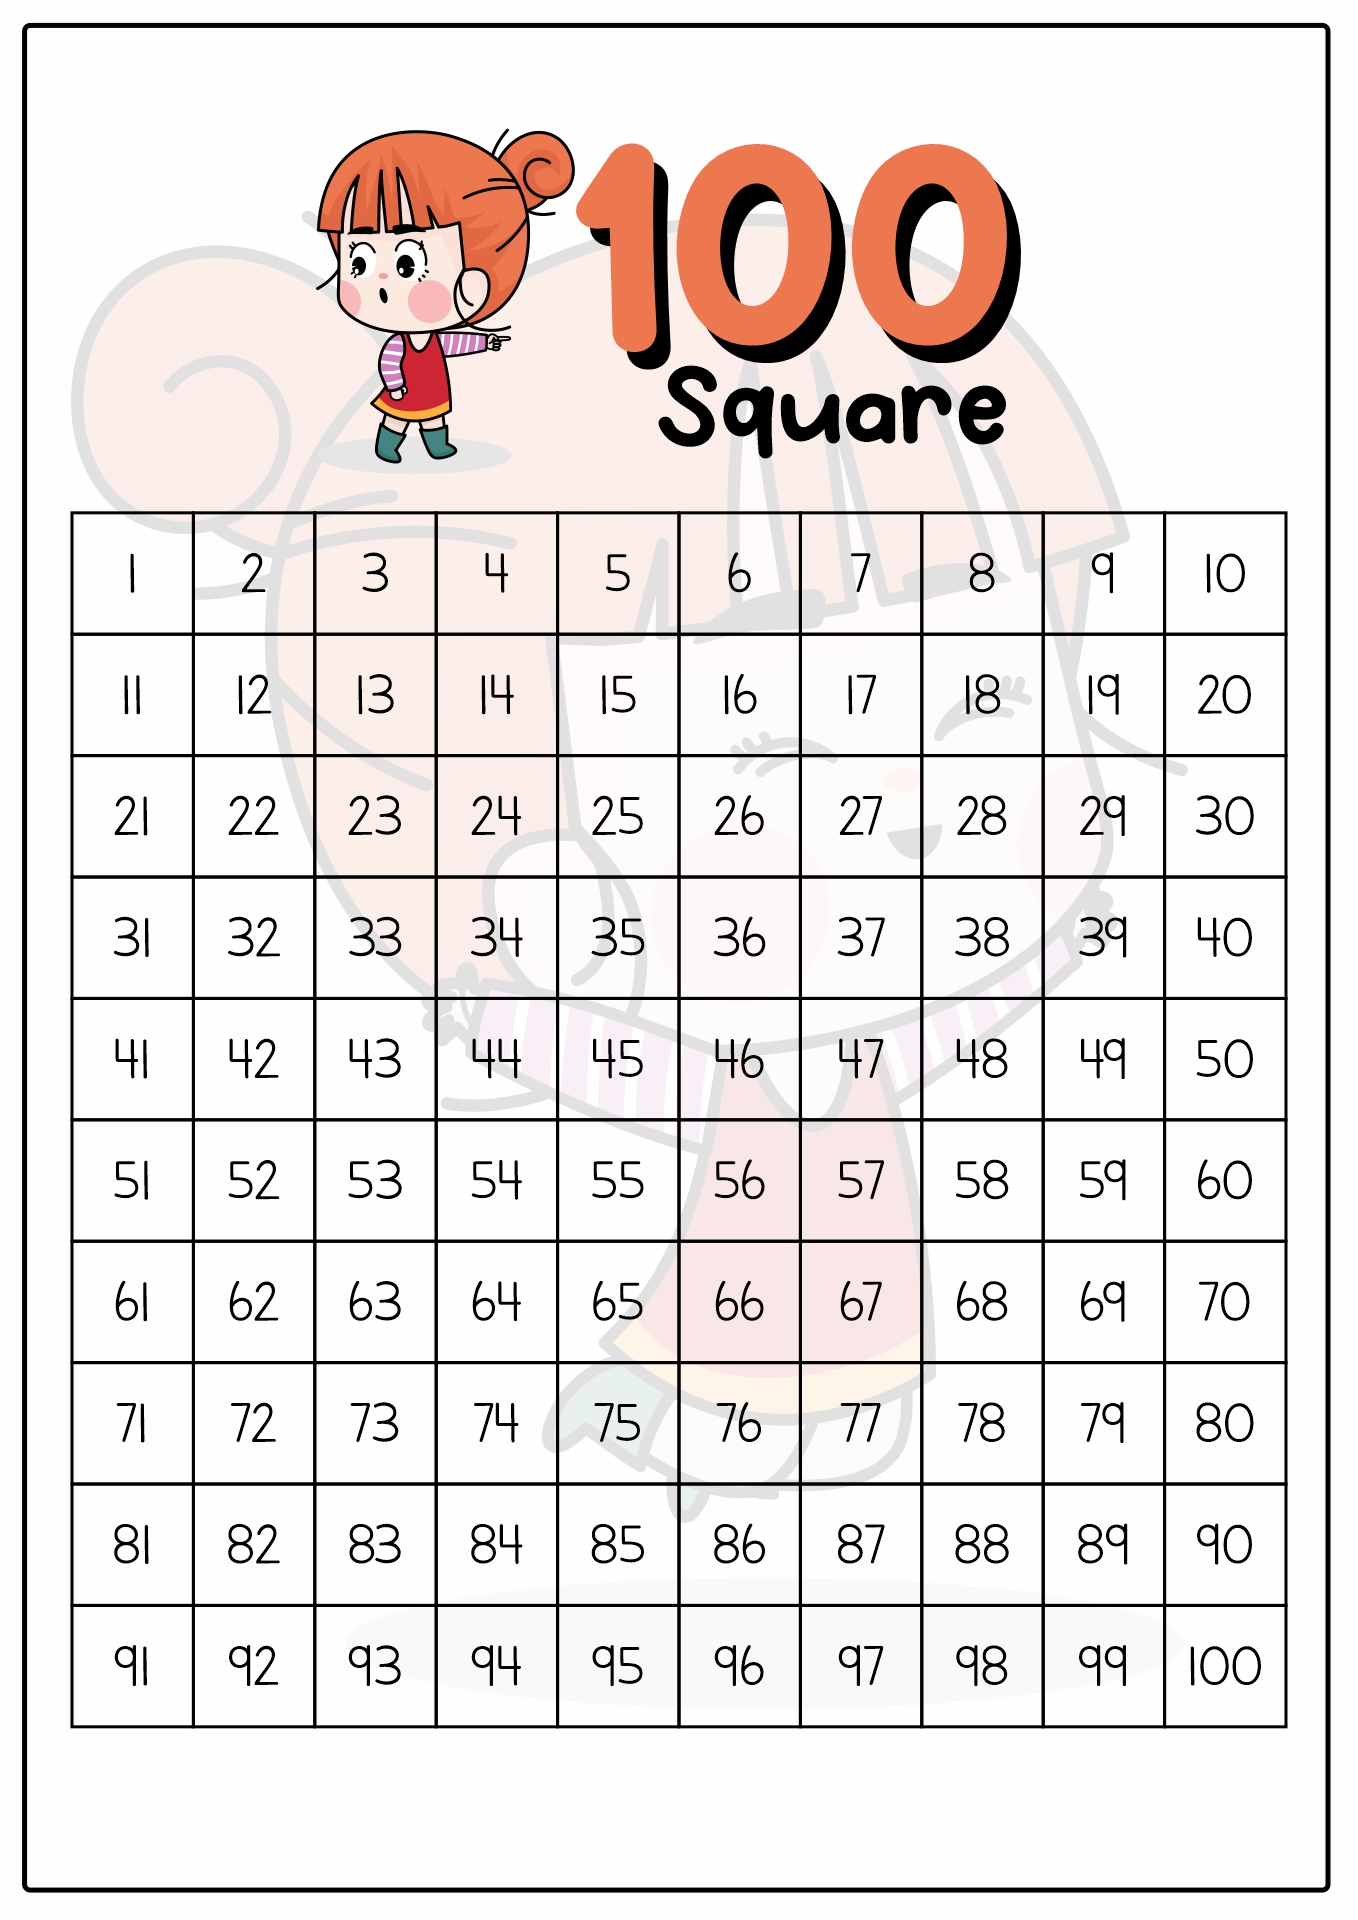 12 Best Images Of Hundreds Square Worksheet Missing Puzzle With 